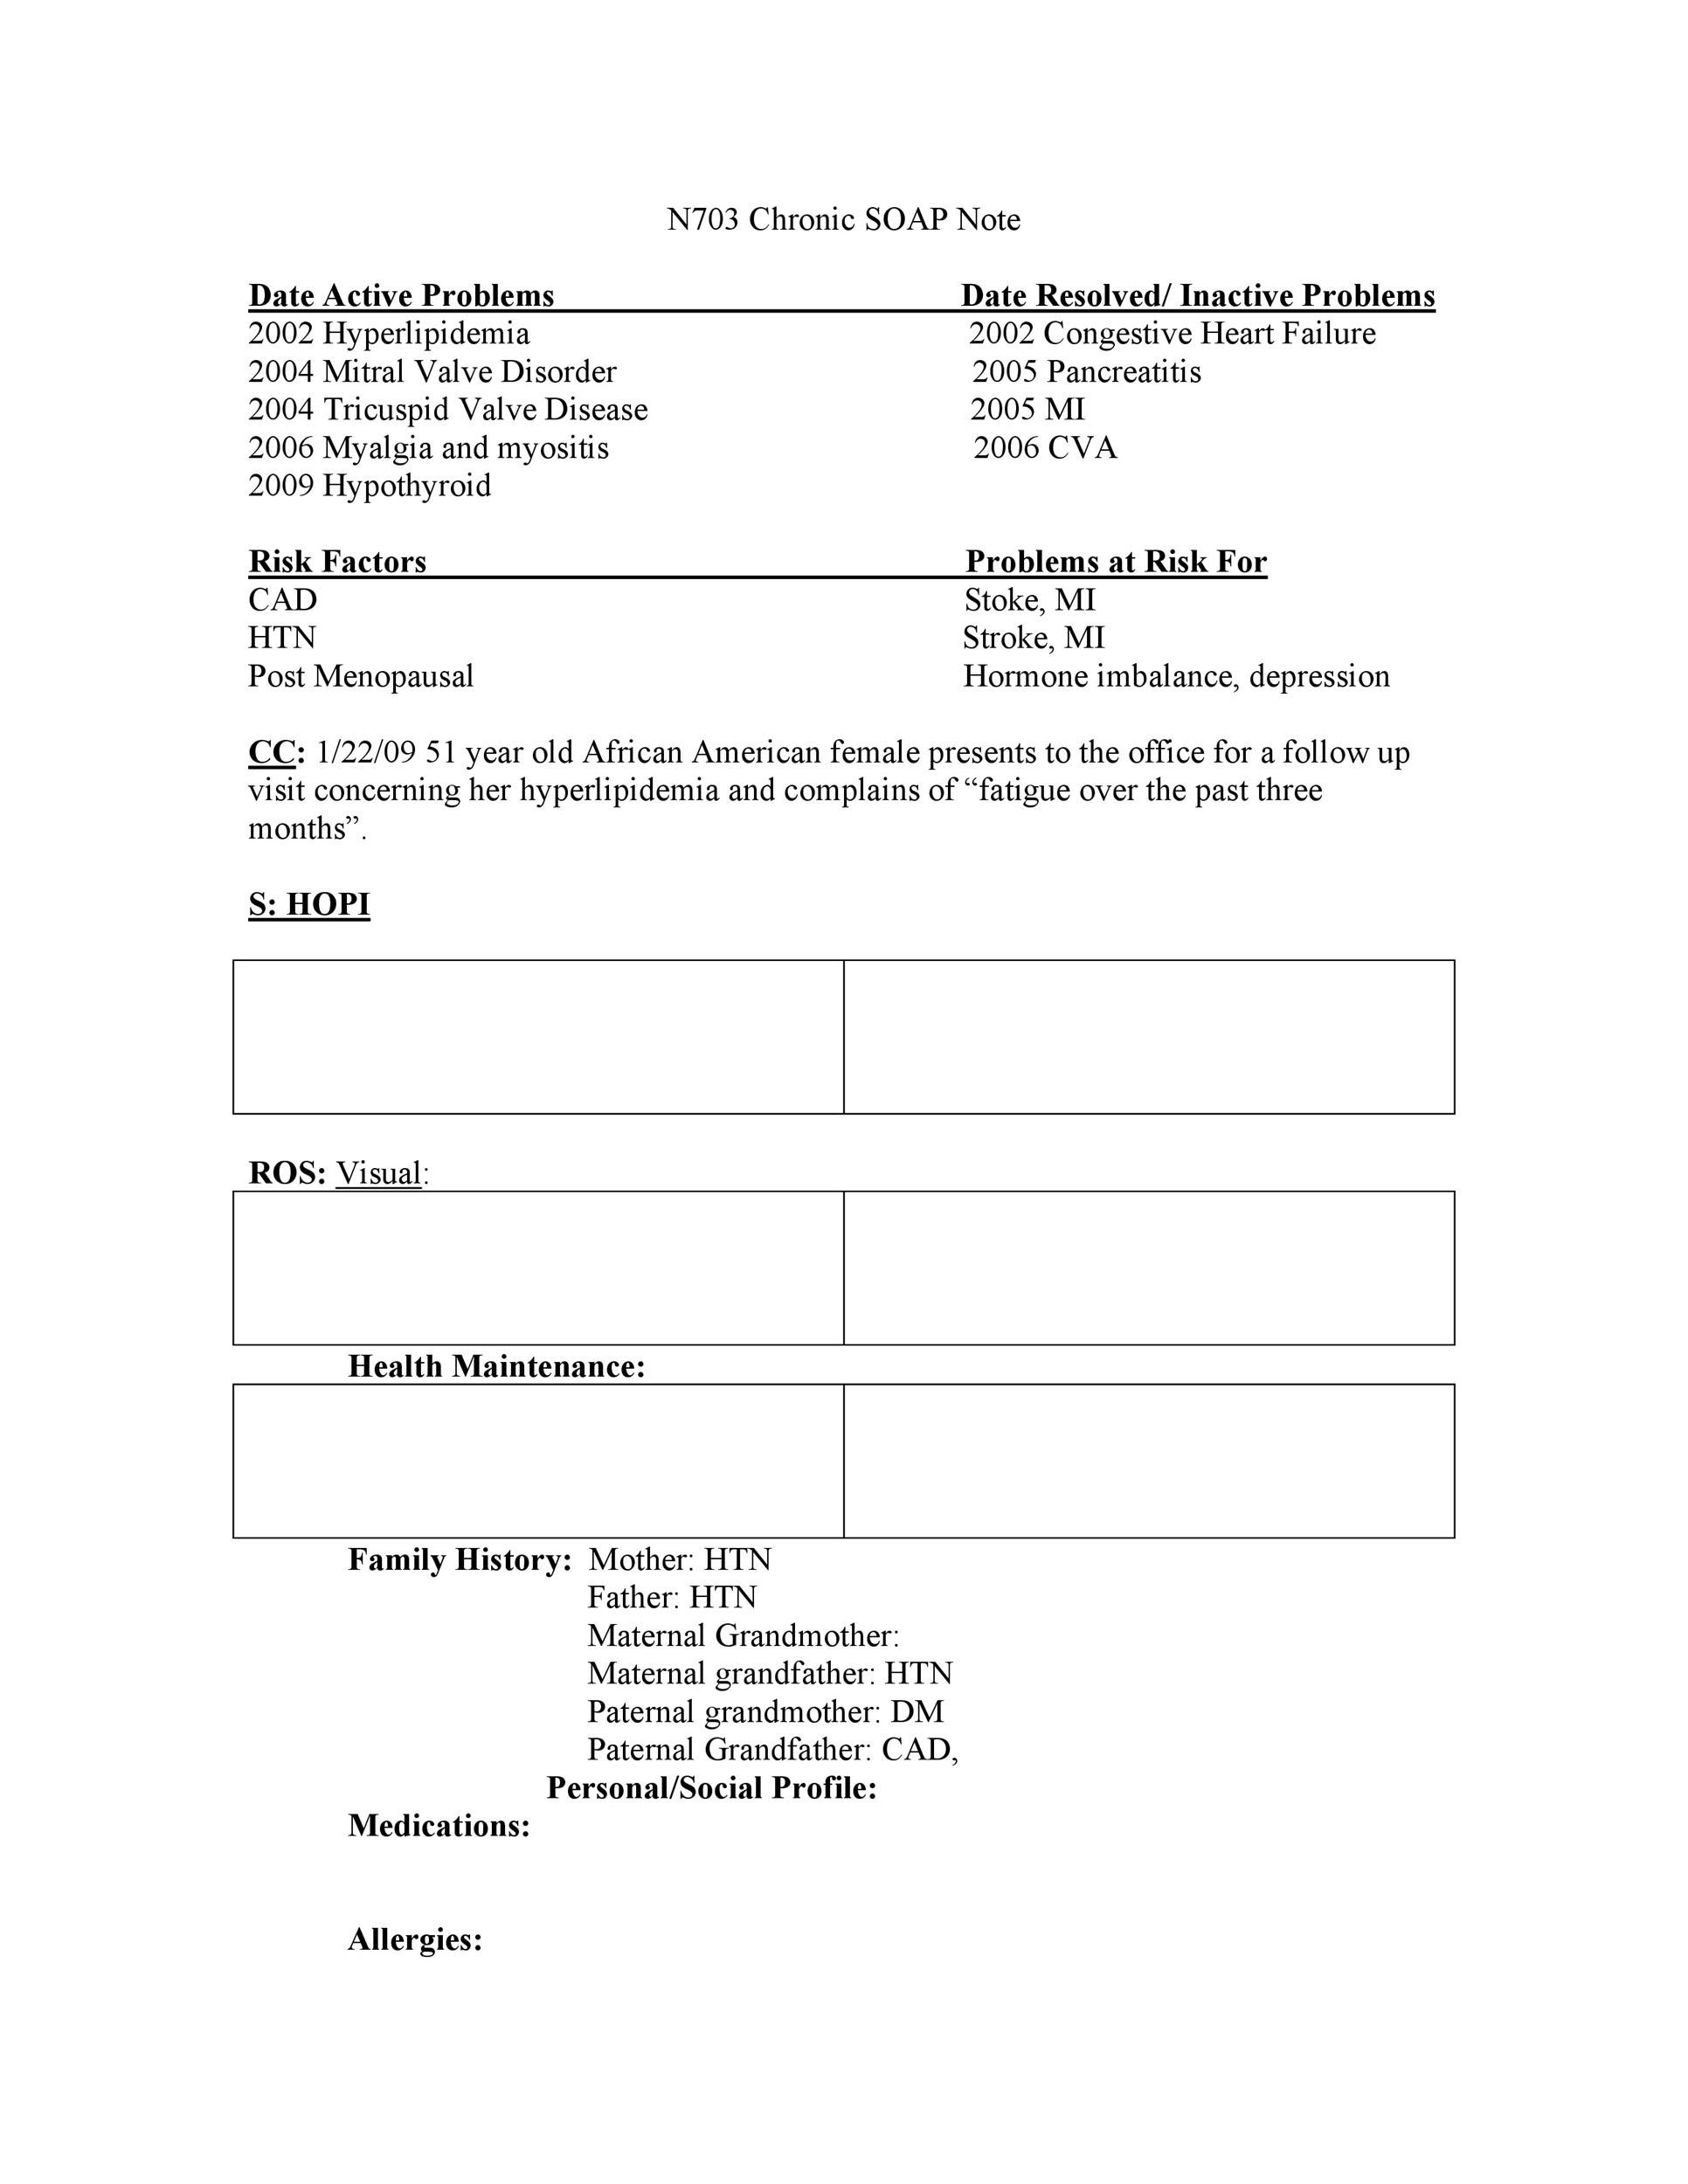 Free Soap Note Template 35